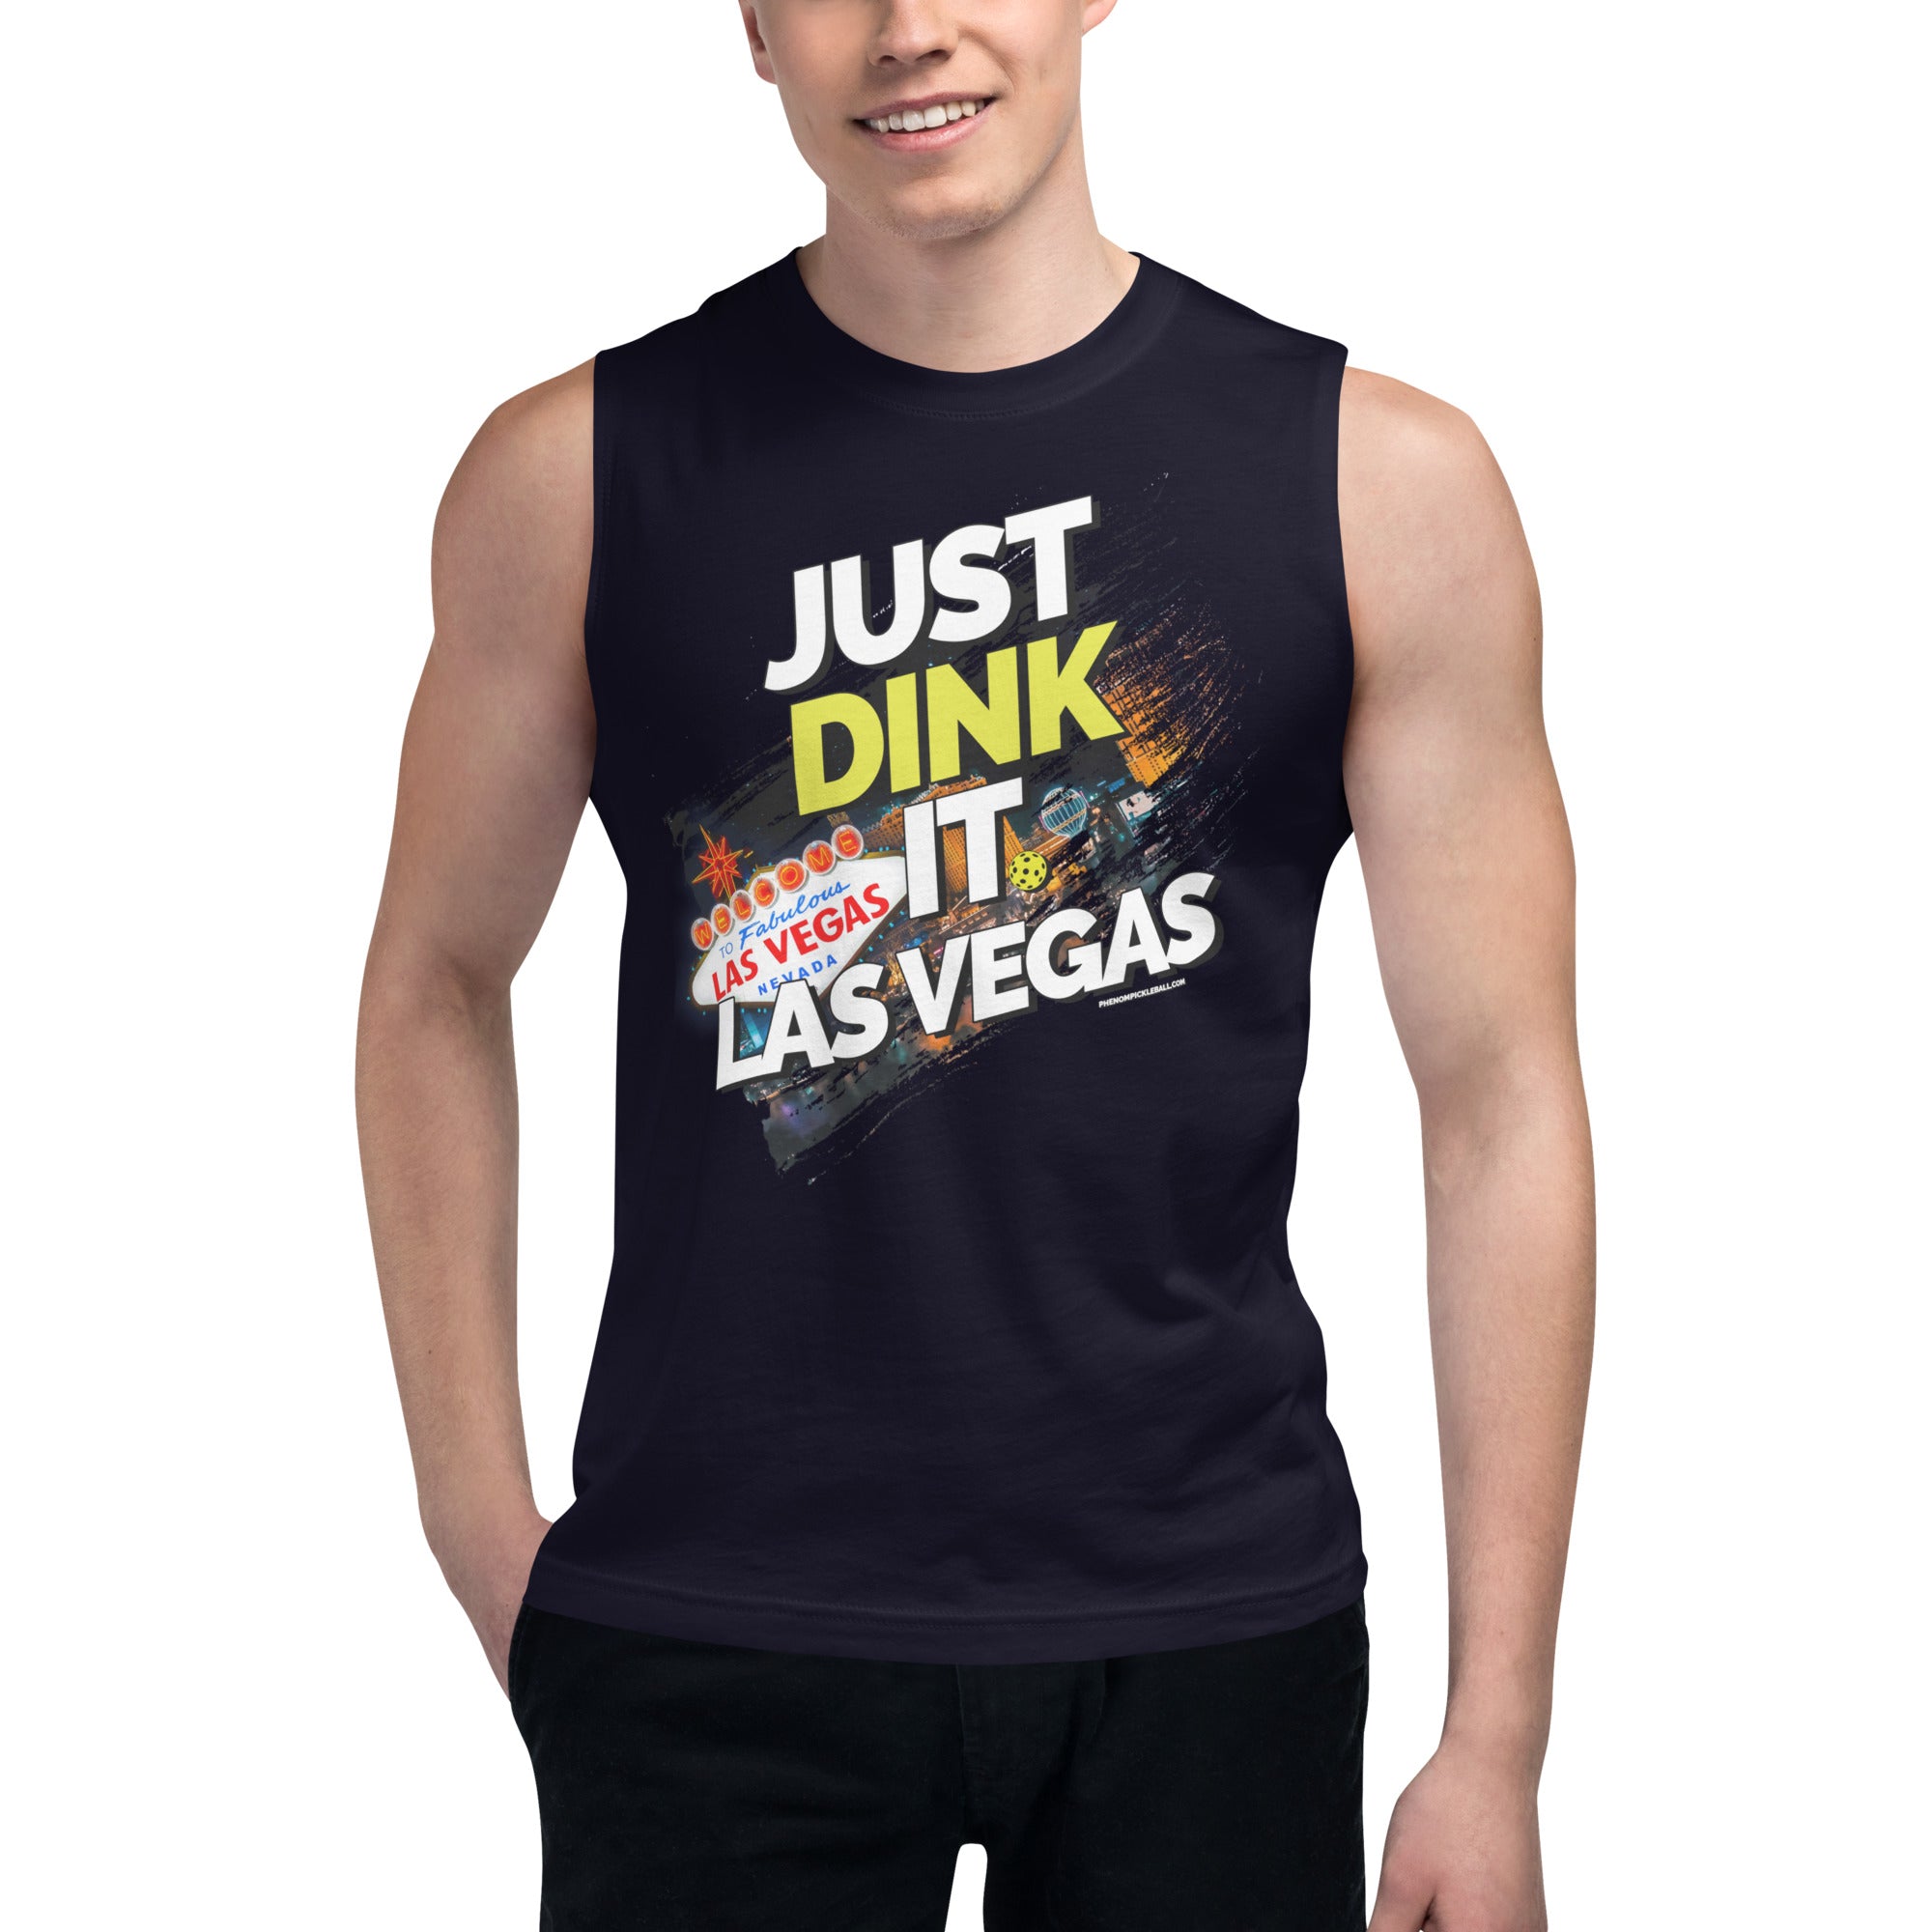 man wearing navy blue just dink it las vegas tank top performance apparel athletic top front view